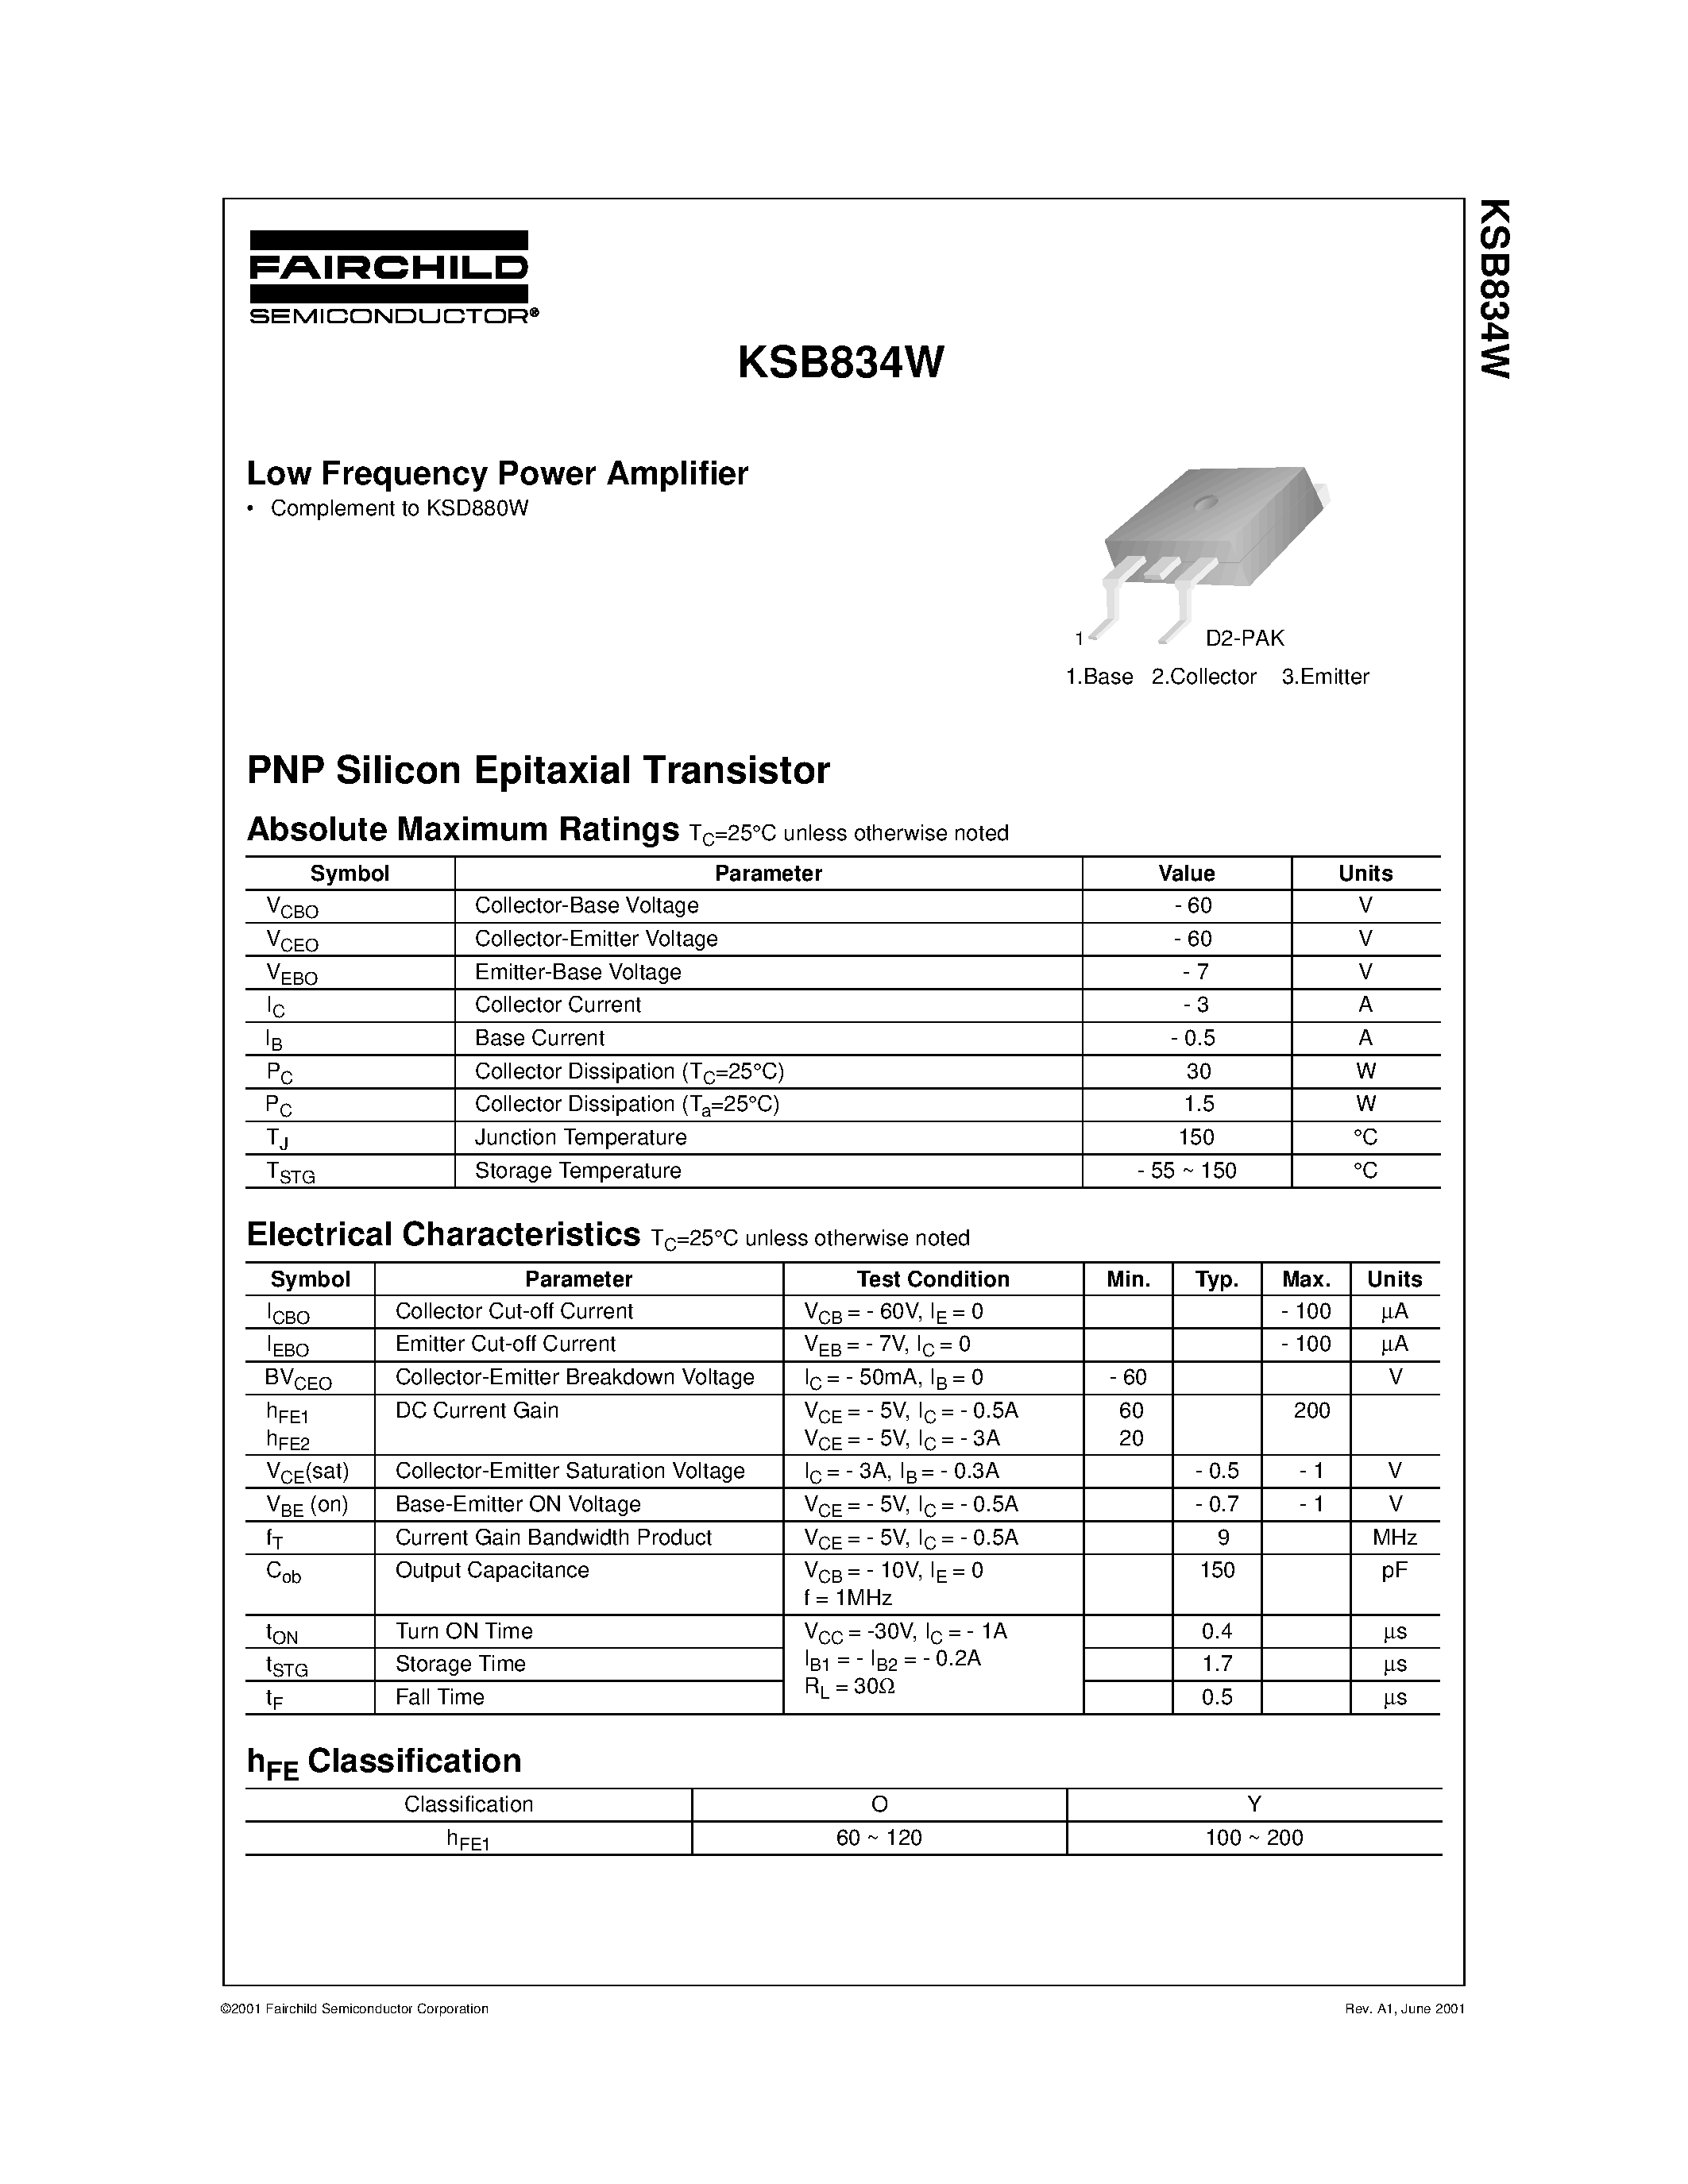 Datasheet KSB834W - Low Frequency Power Amplifier page 1